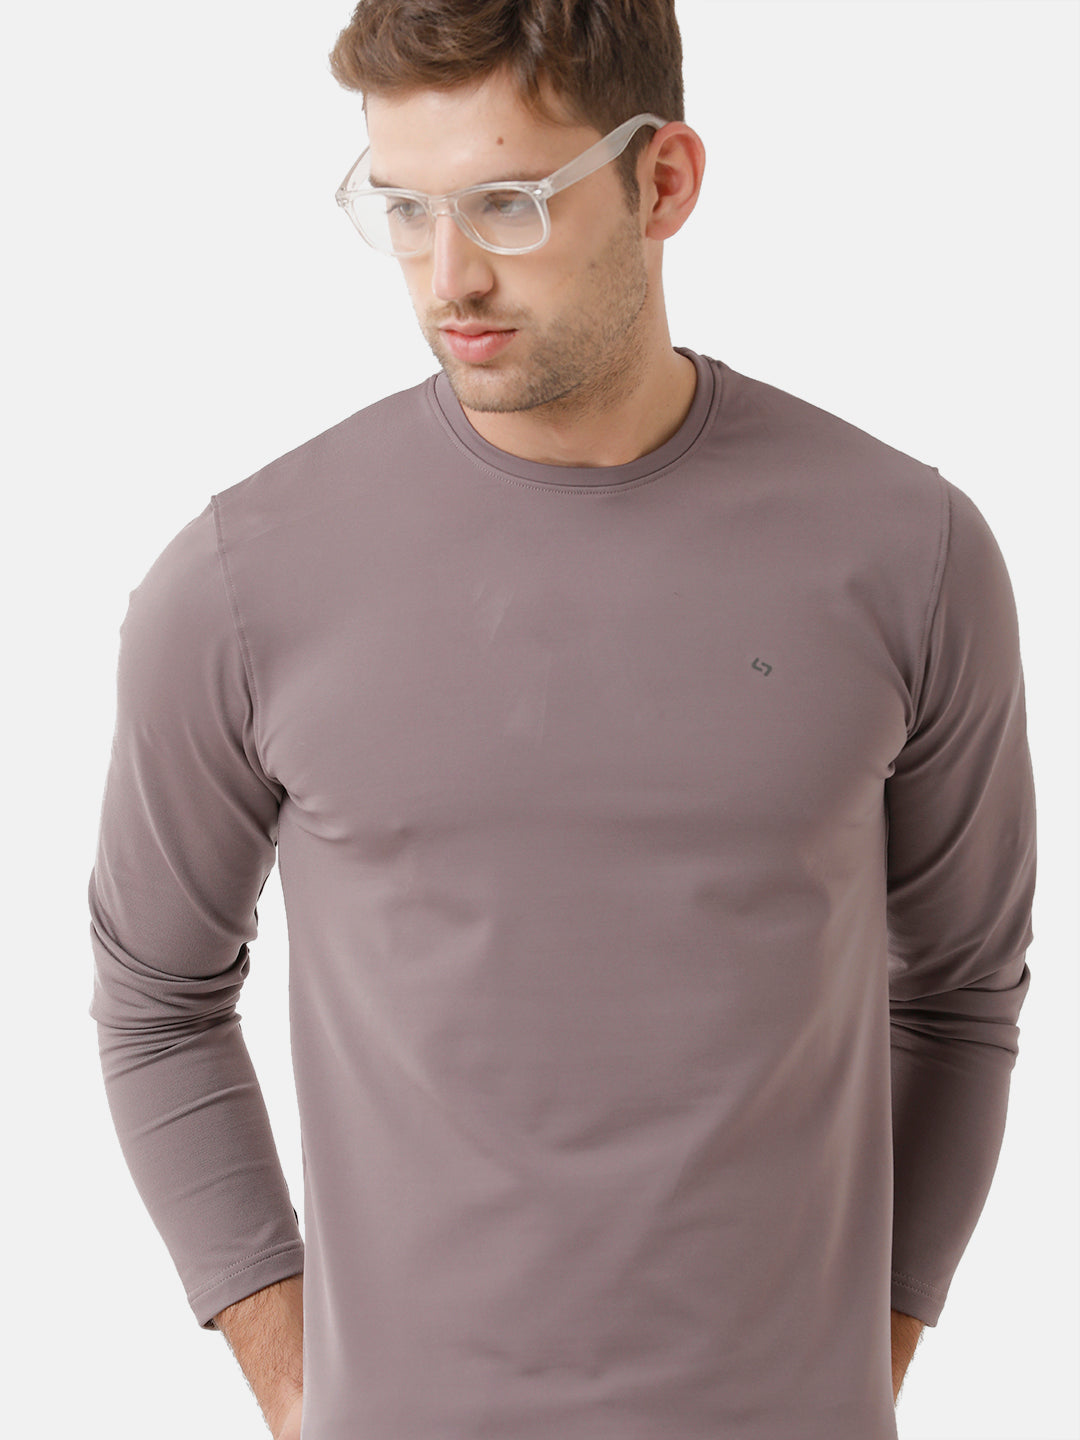 Classic Polo Mens Cotton Full Sleeve Solid Slim Fit Round Neck Light Brown Color T-Shirt | Verno 310 A